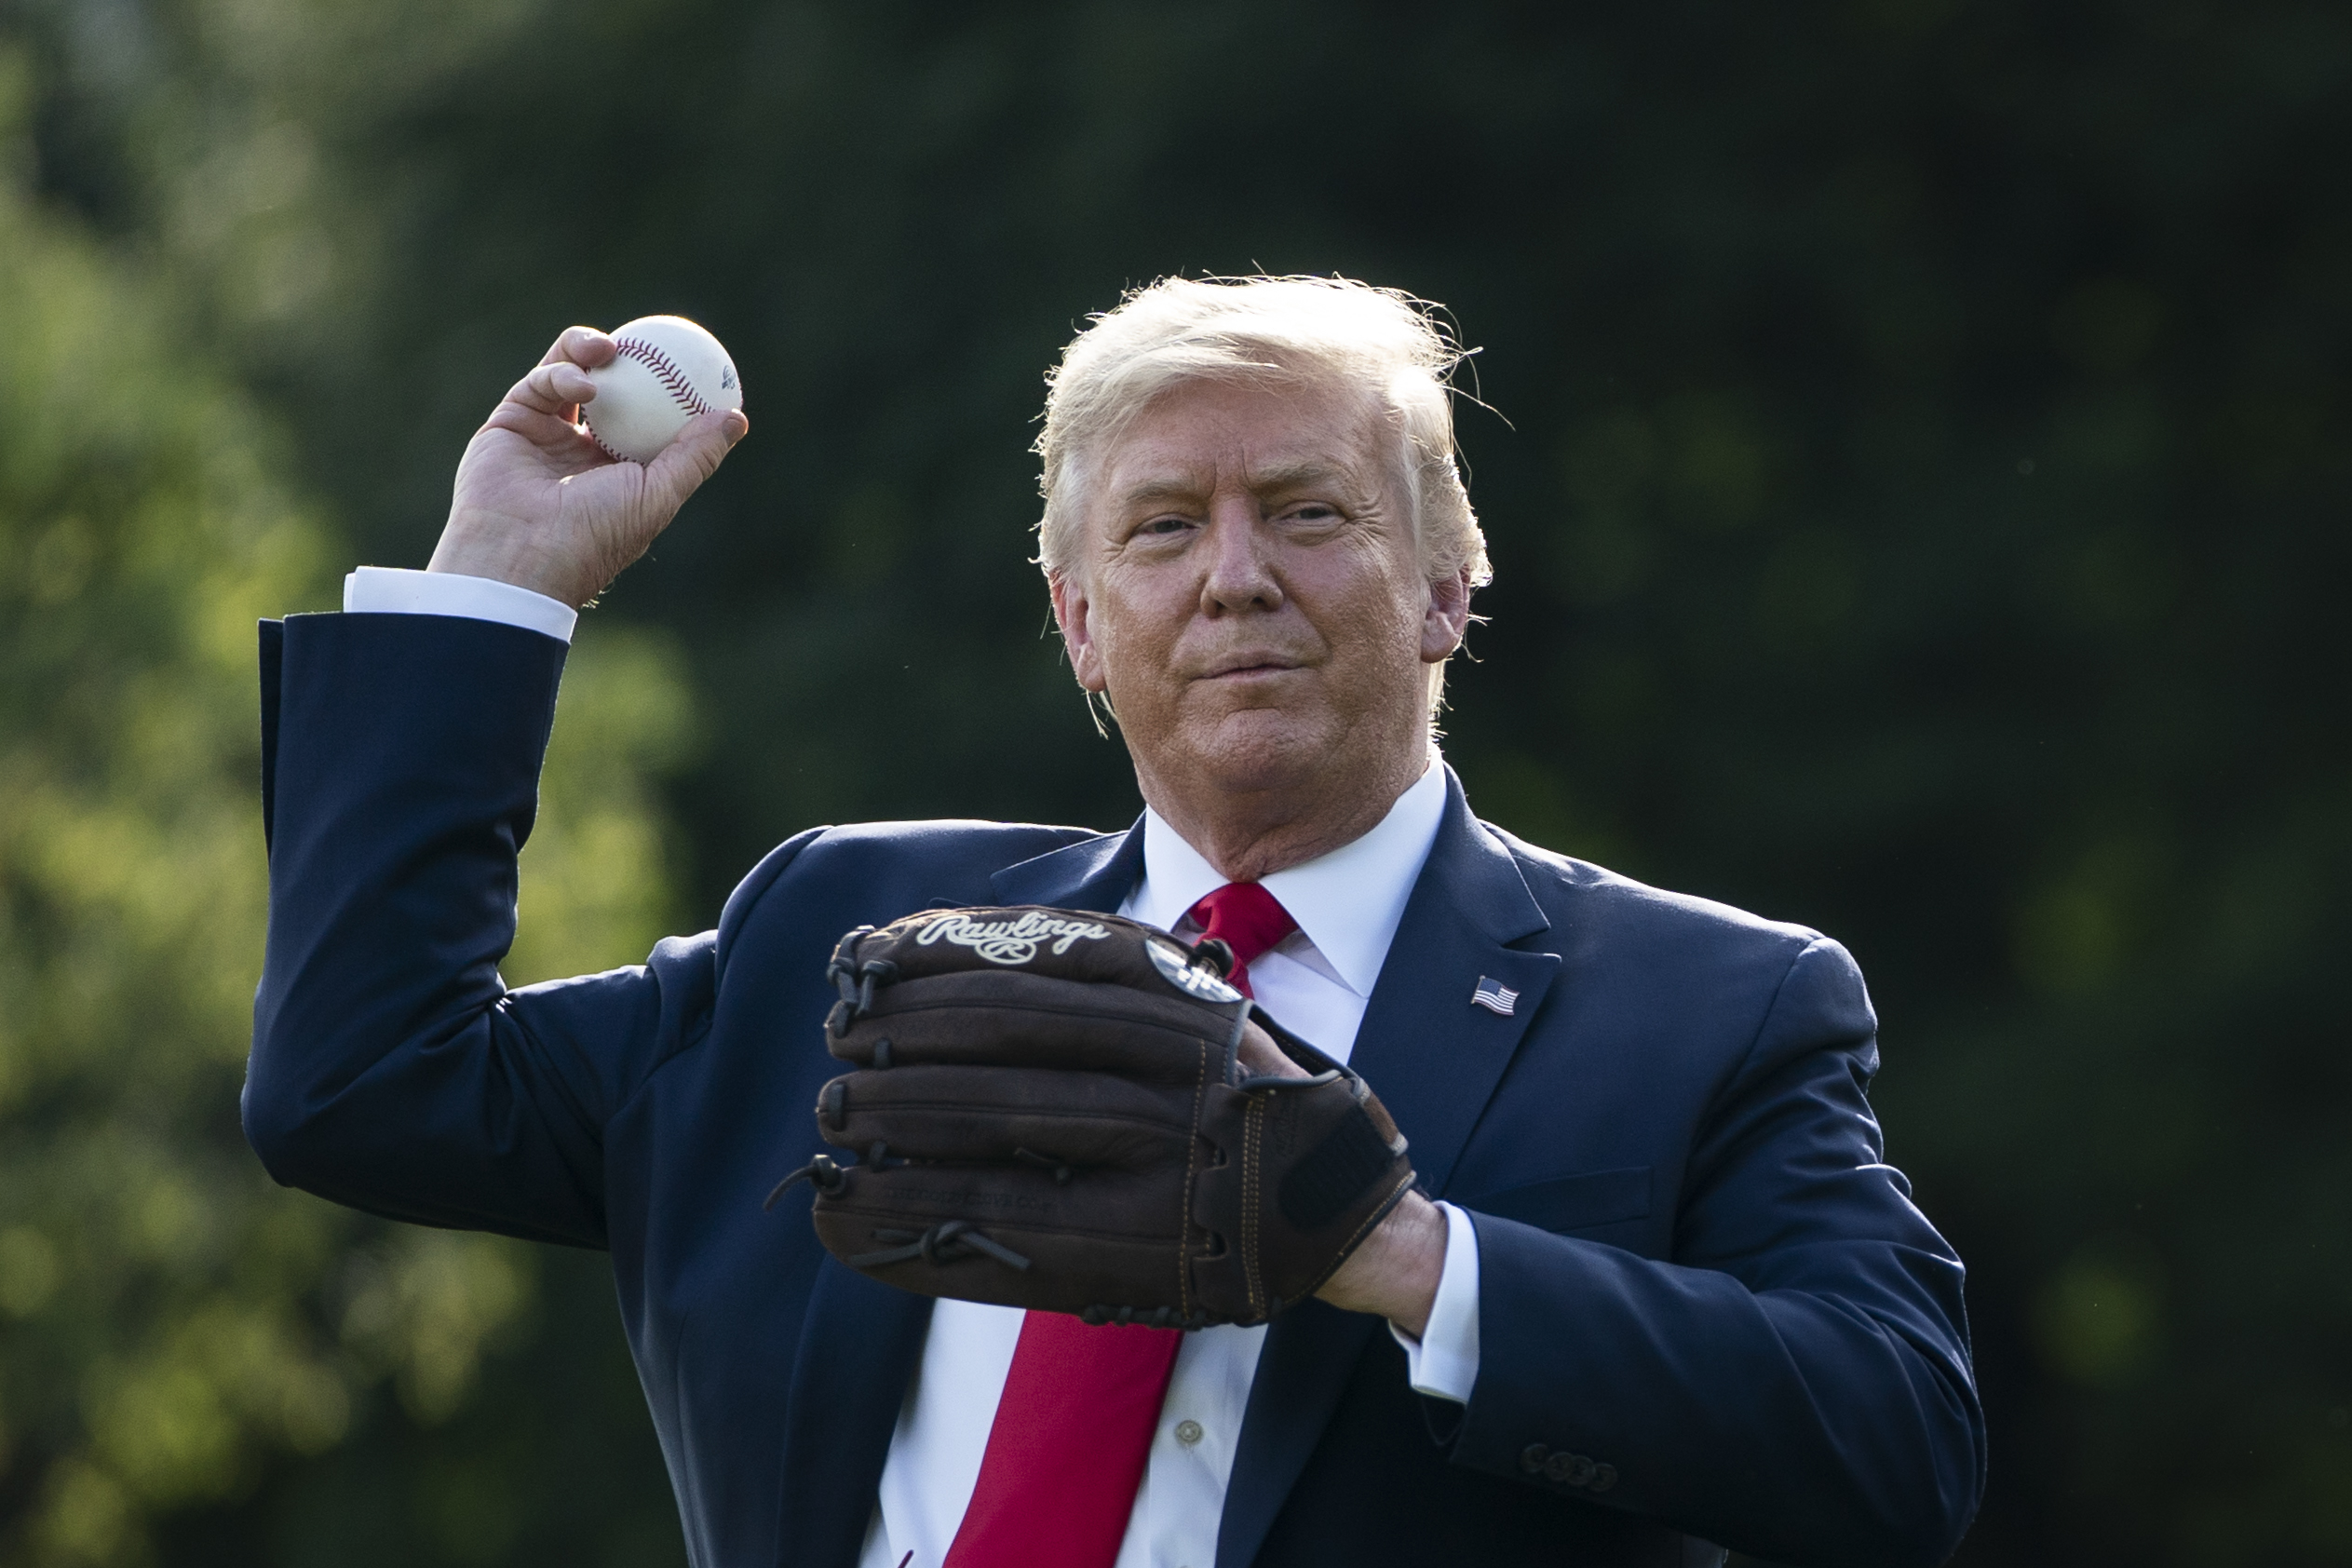 Trump to New York Yankees Great Mariano Rivera: We Could Use You